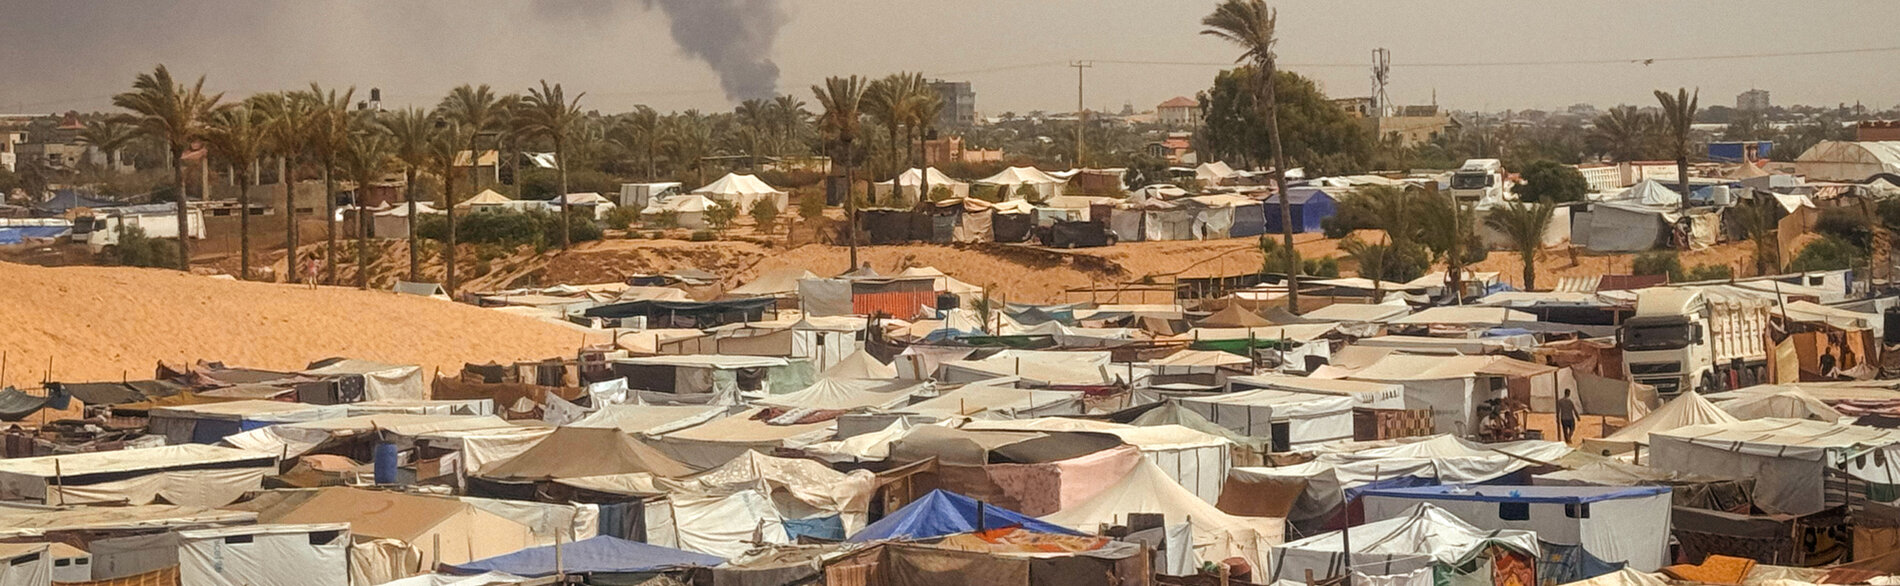 Makeshift tents of internally displaced people in Al Mawasi, Khan Younis. Photo by OCHA